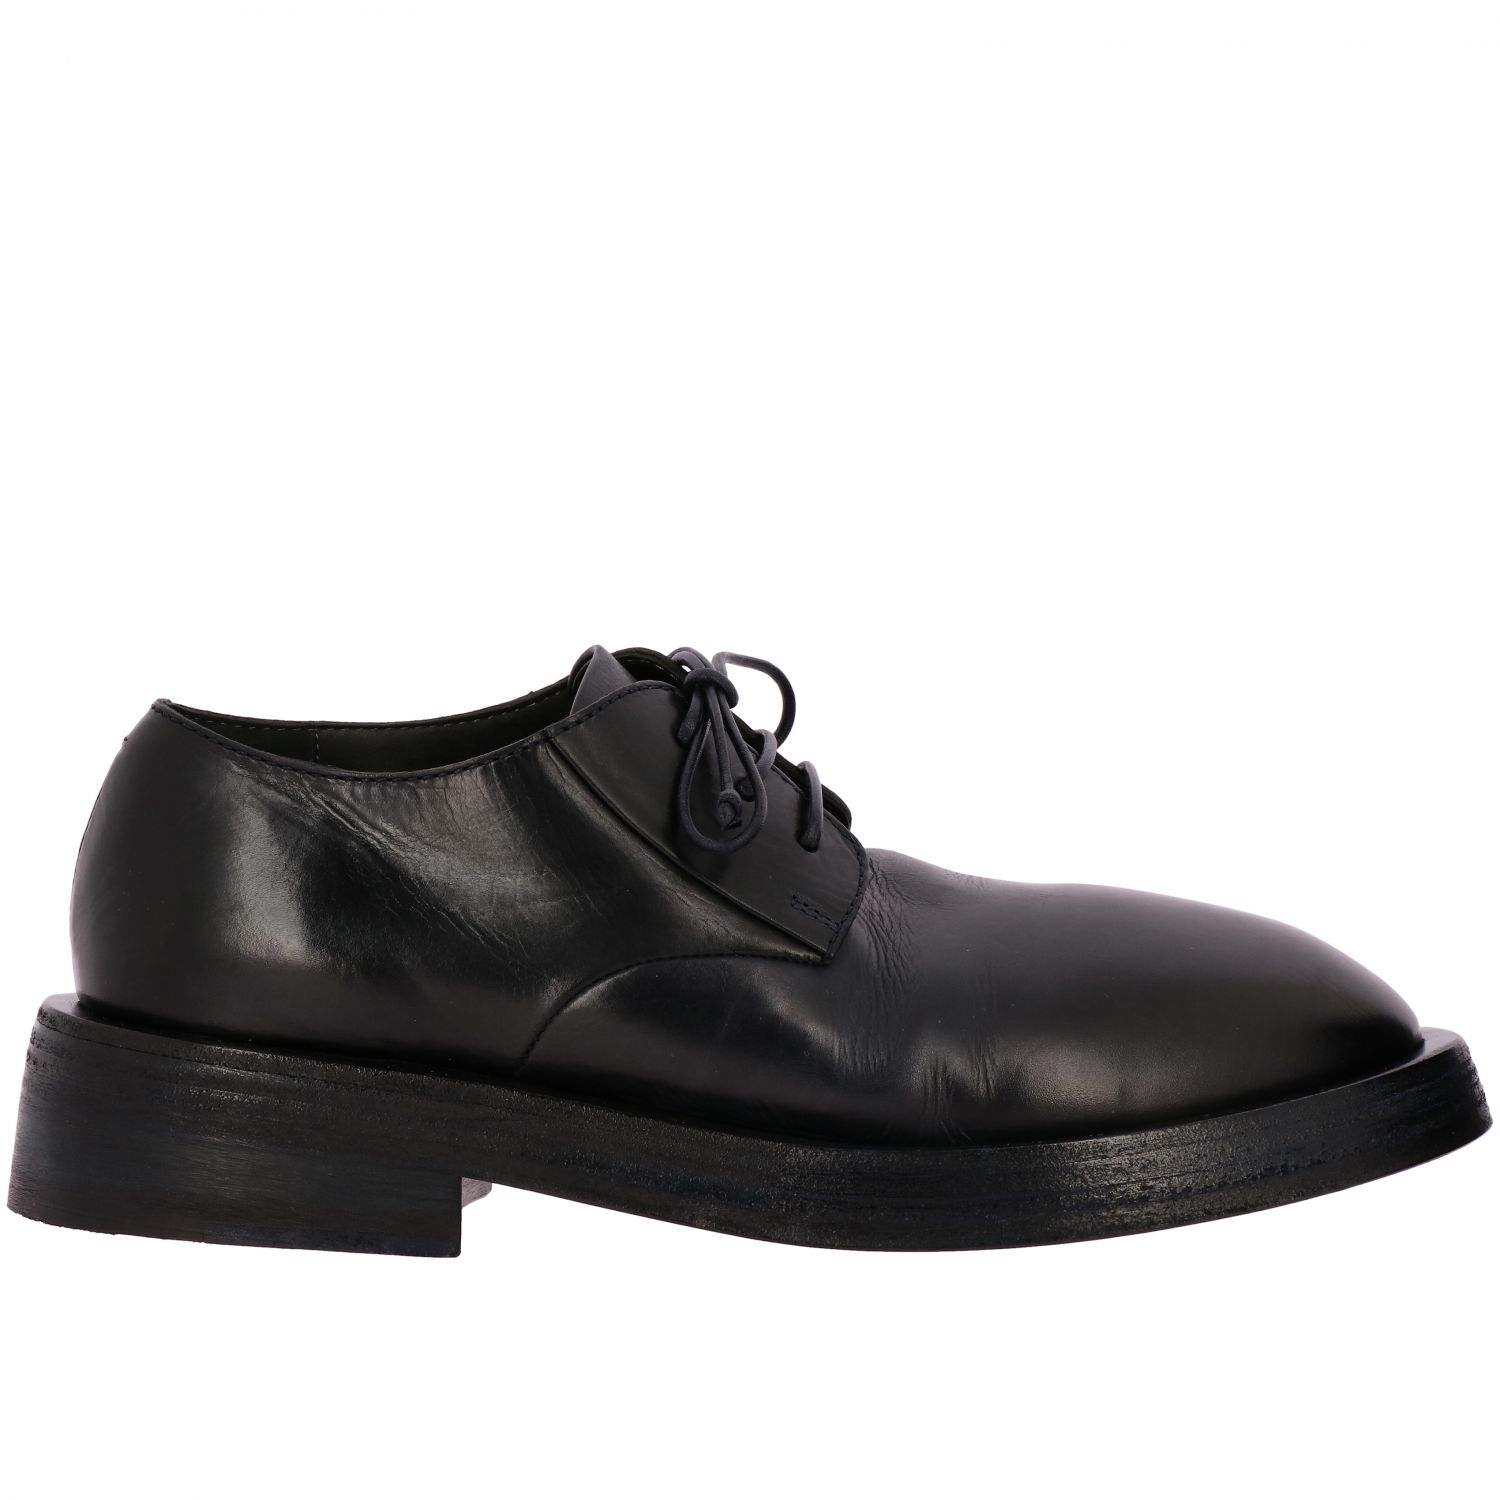 Marsell Mentone Derby shoes in leather 